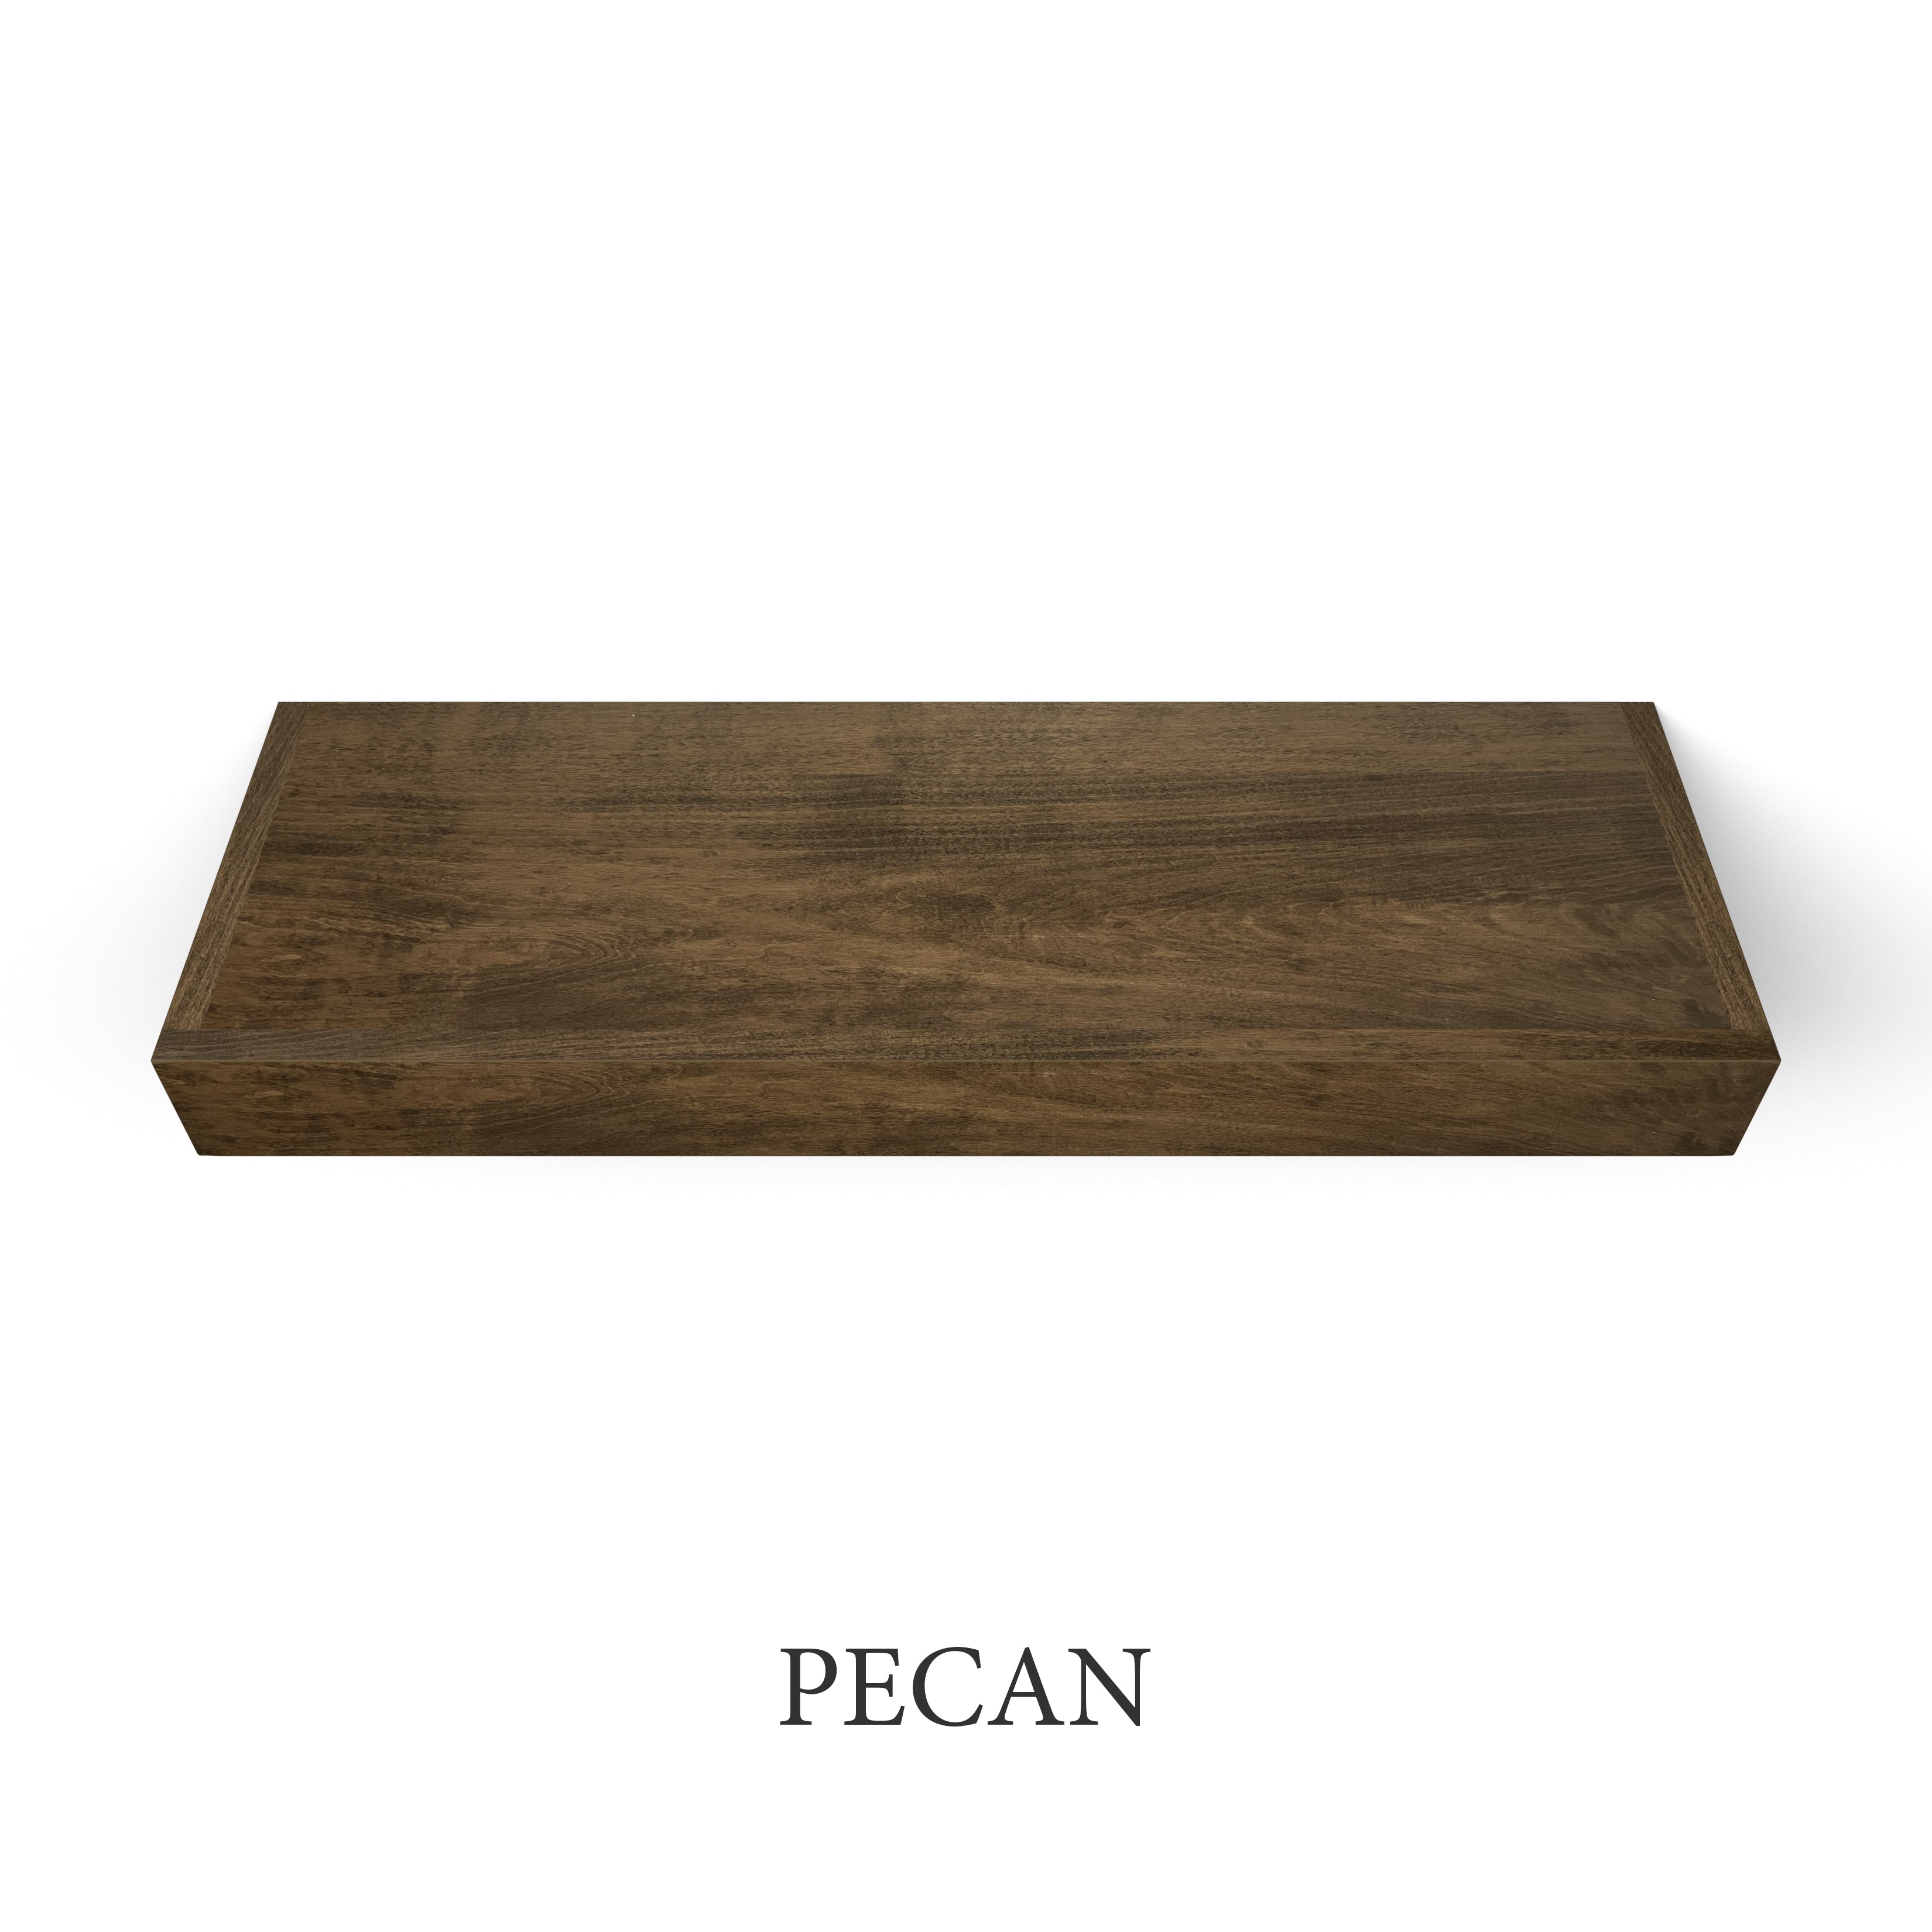 pecan Maple 3 Inch Thick Floating Shelf